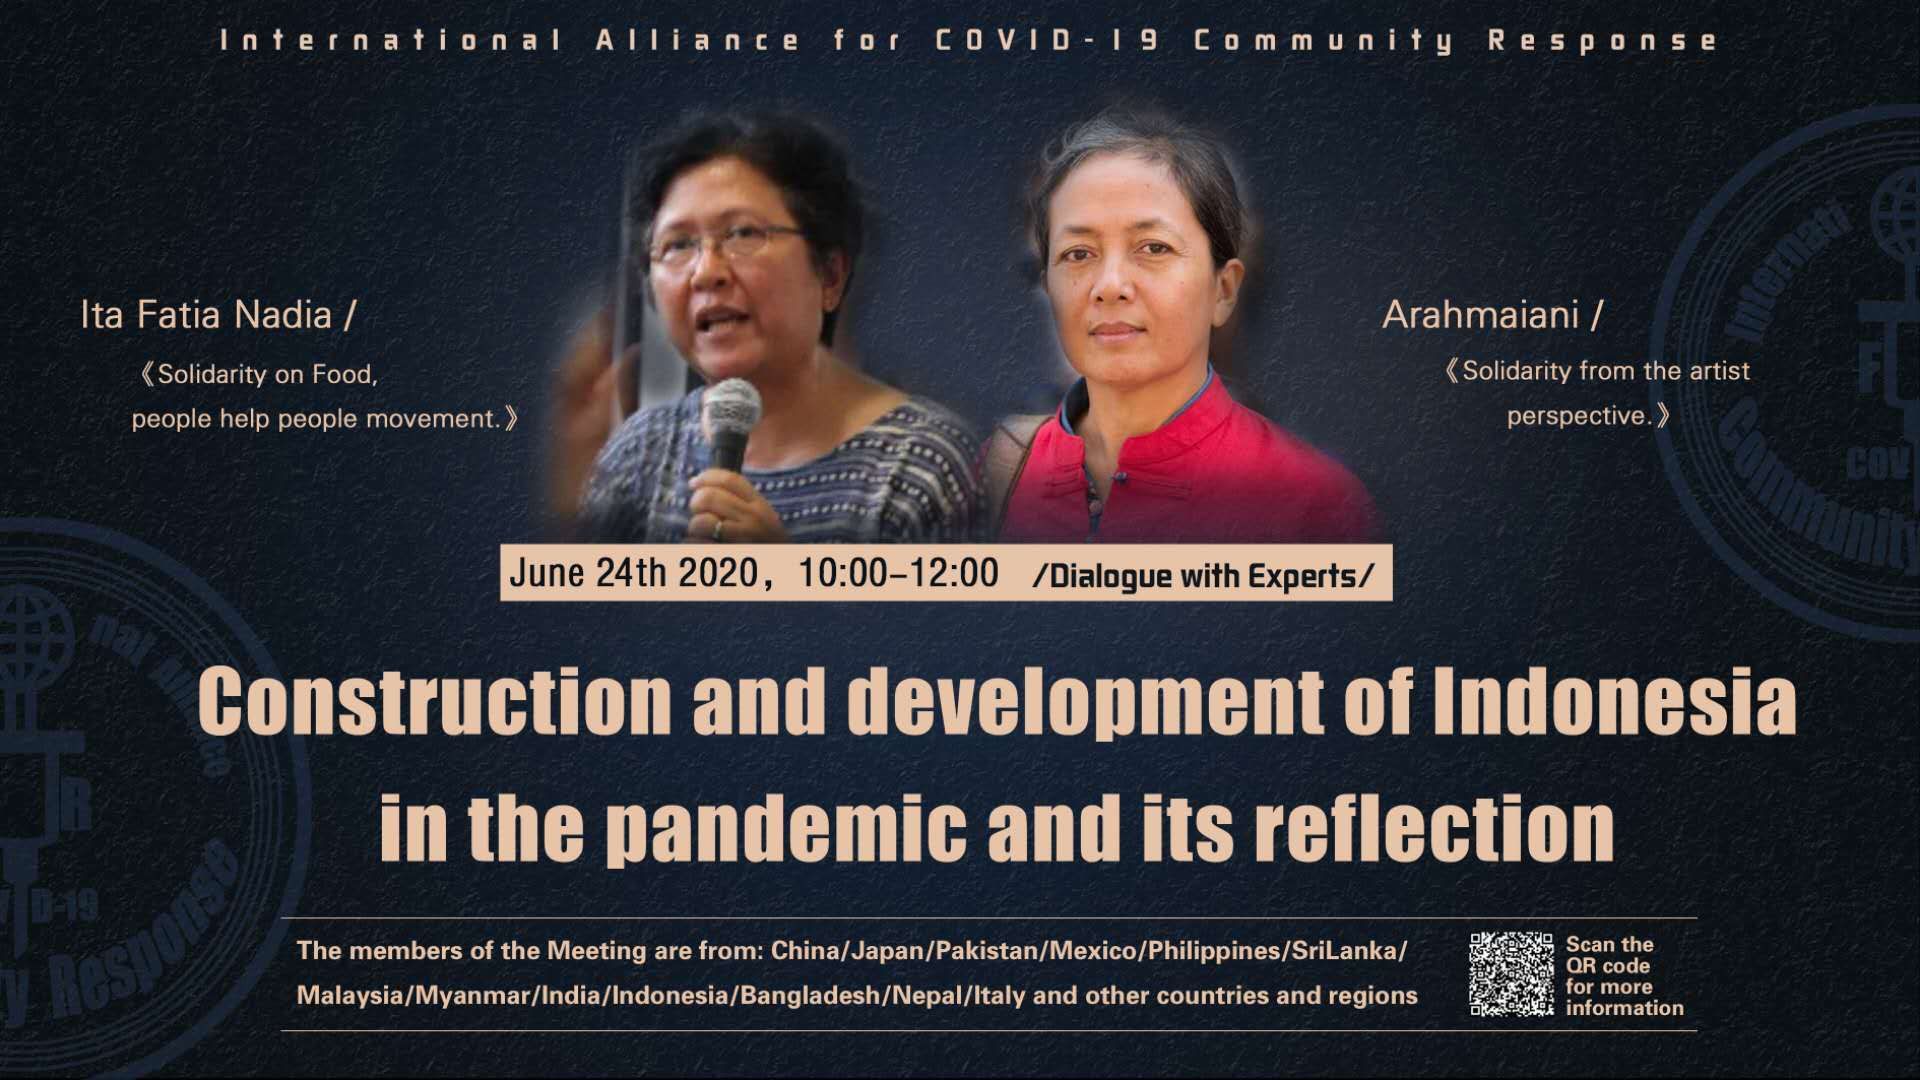 Construction and development of Indonesia in the pandemic and its reflection